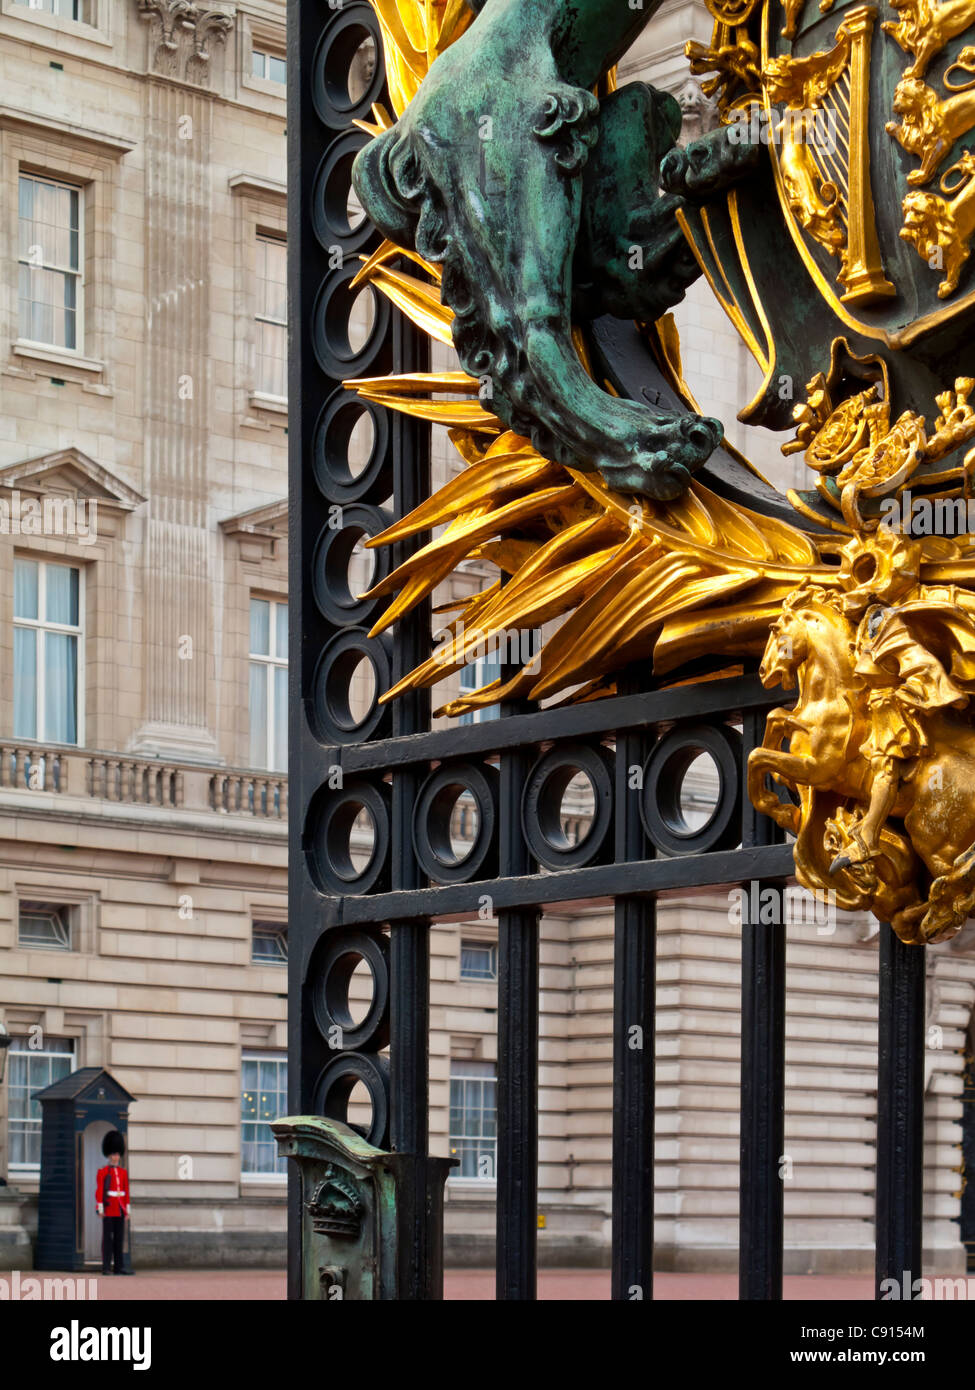 Detail of the gates in front of Buckingham Palace London England the main residence of the British monarch and Royal Family Stock Photo